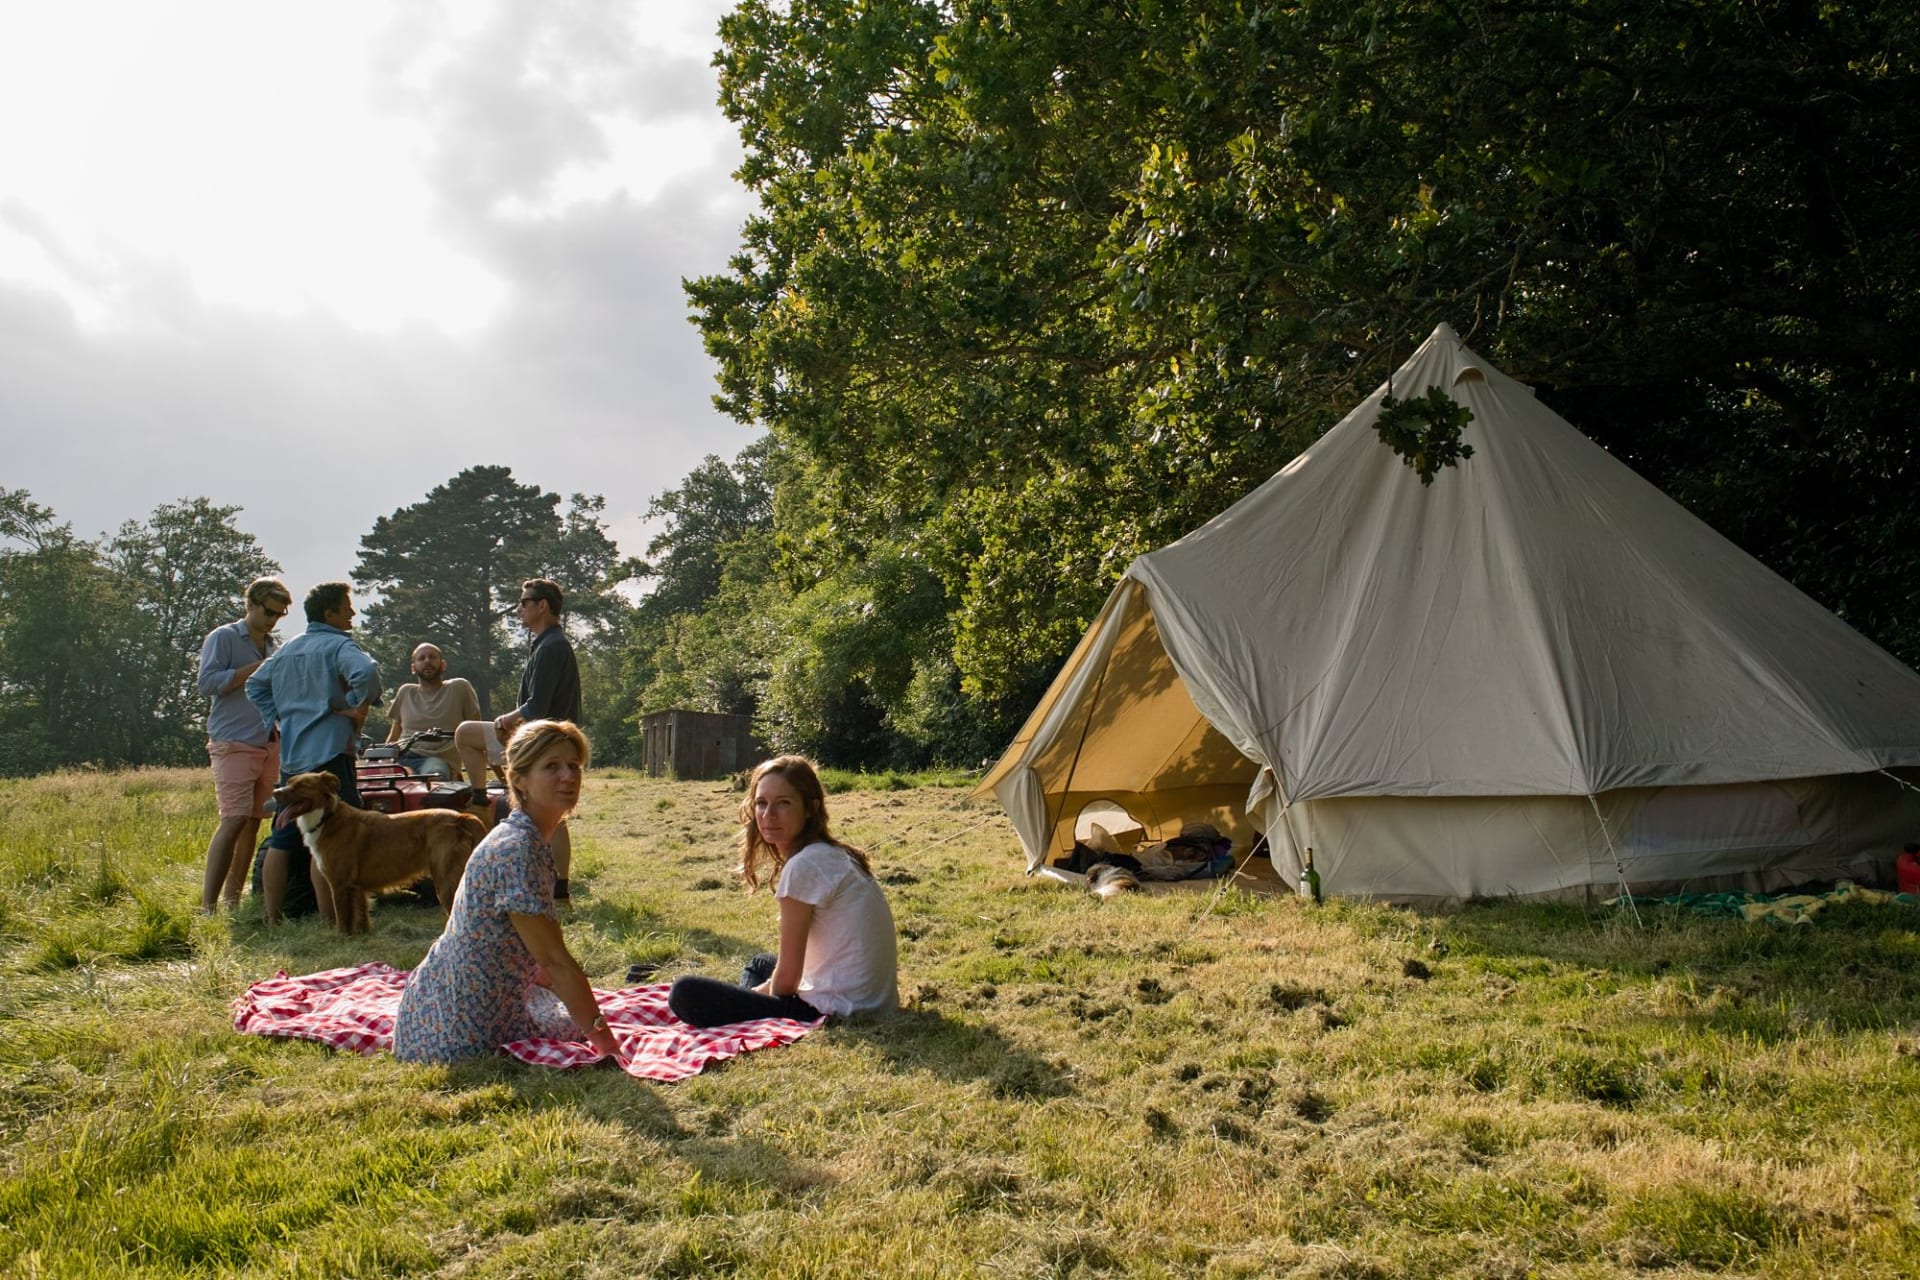 A charming Dorset campsite overlooking the beautiful Stour valley and a short walk from both the river and the market town of Wimborne Minster.